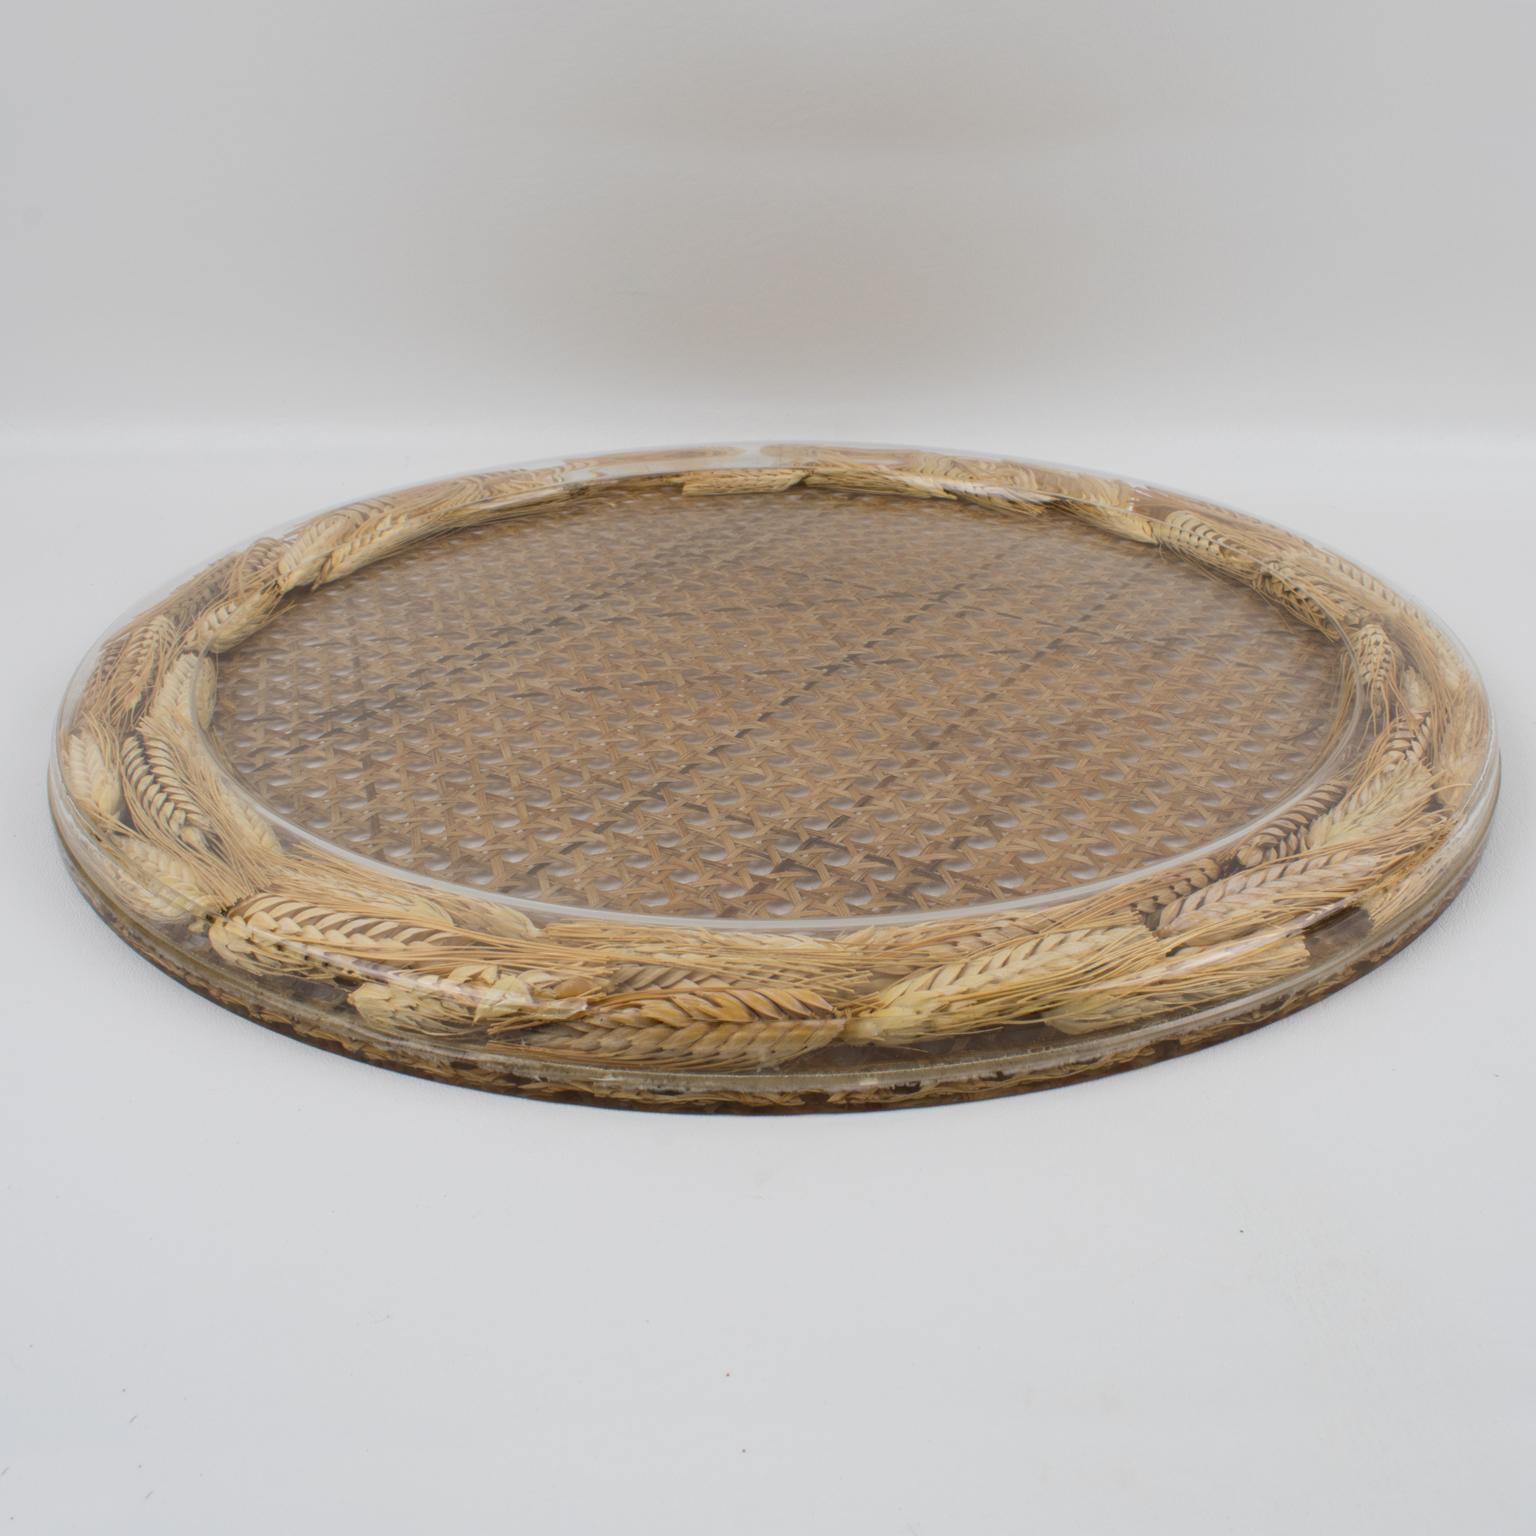 Late 20th Century Christian Dior Tray Board Platter Lucite, Rattan and Wheat